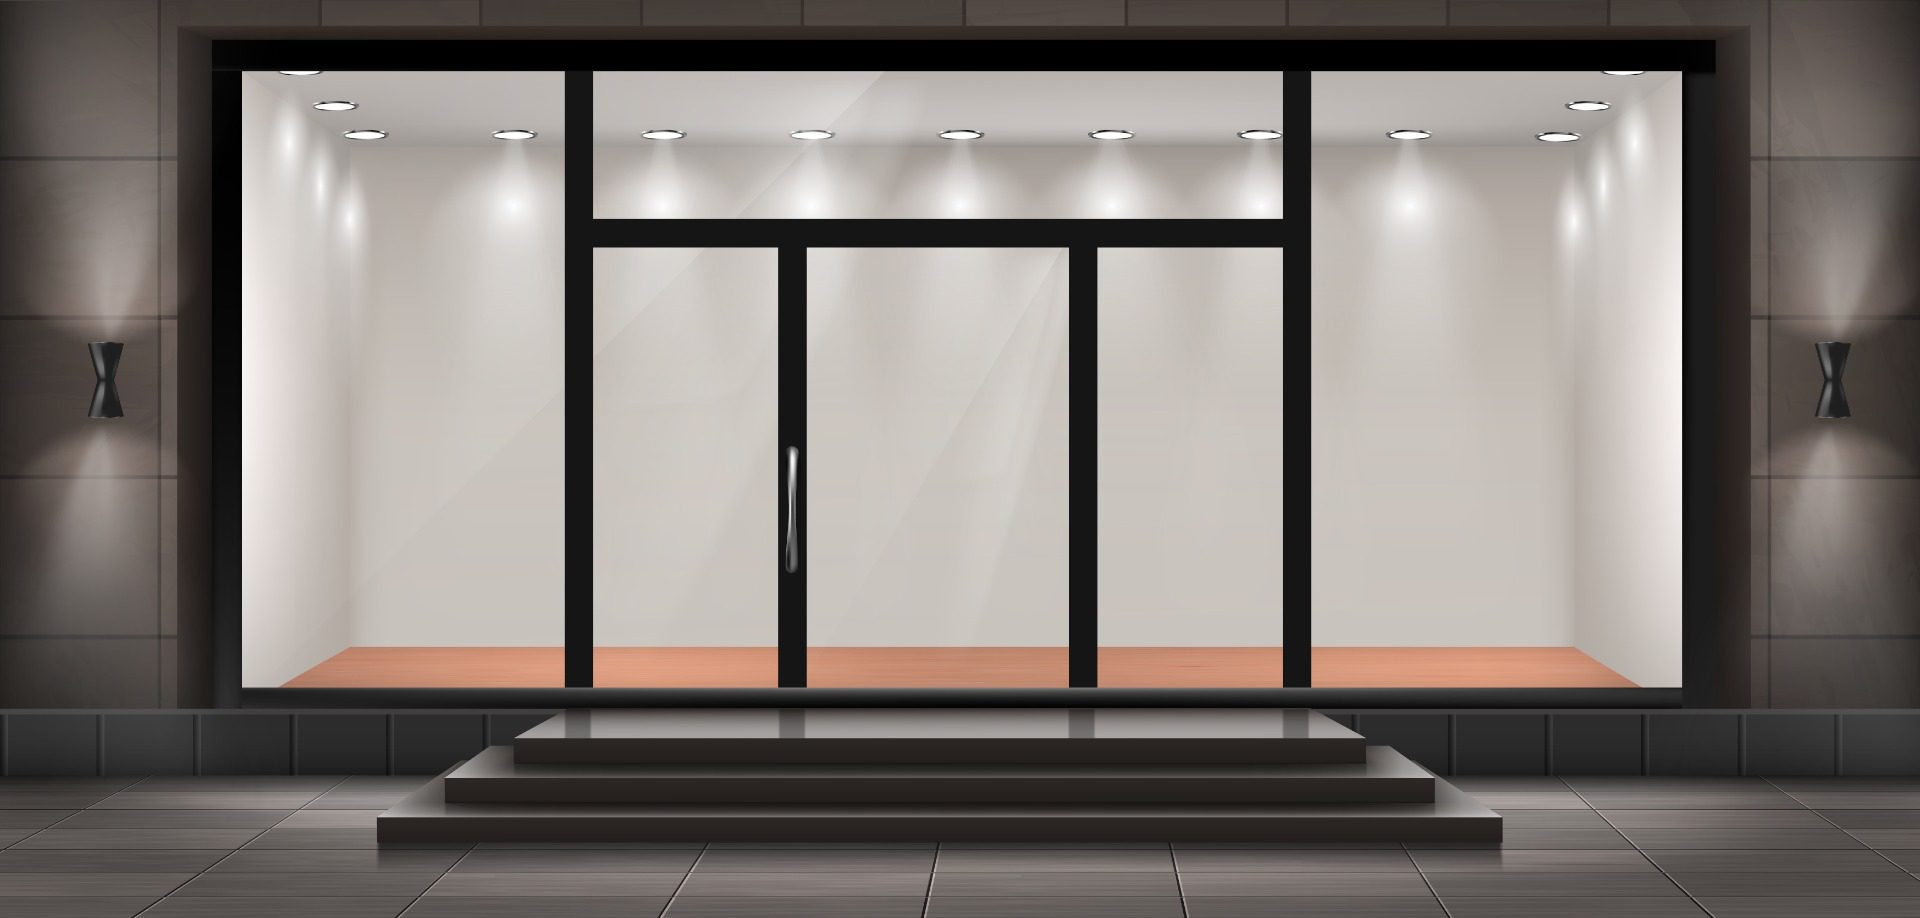 Doors and Windows Solution for Storefronts & Commercial Glasses